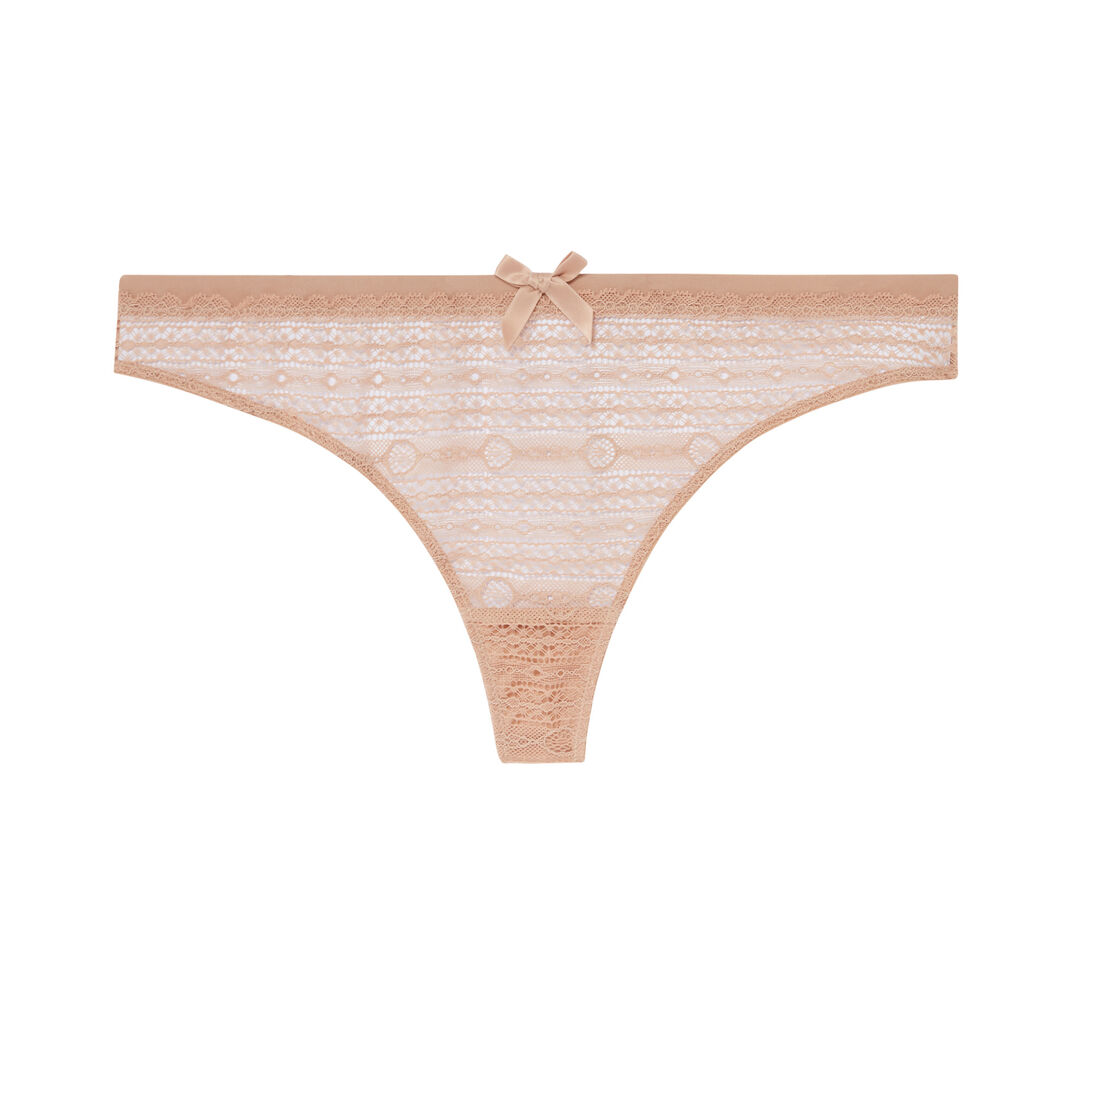 Lace thong with bow detail - beige;